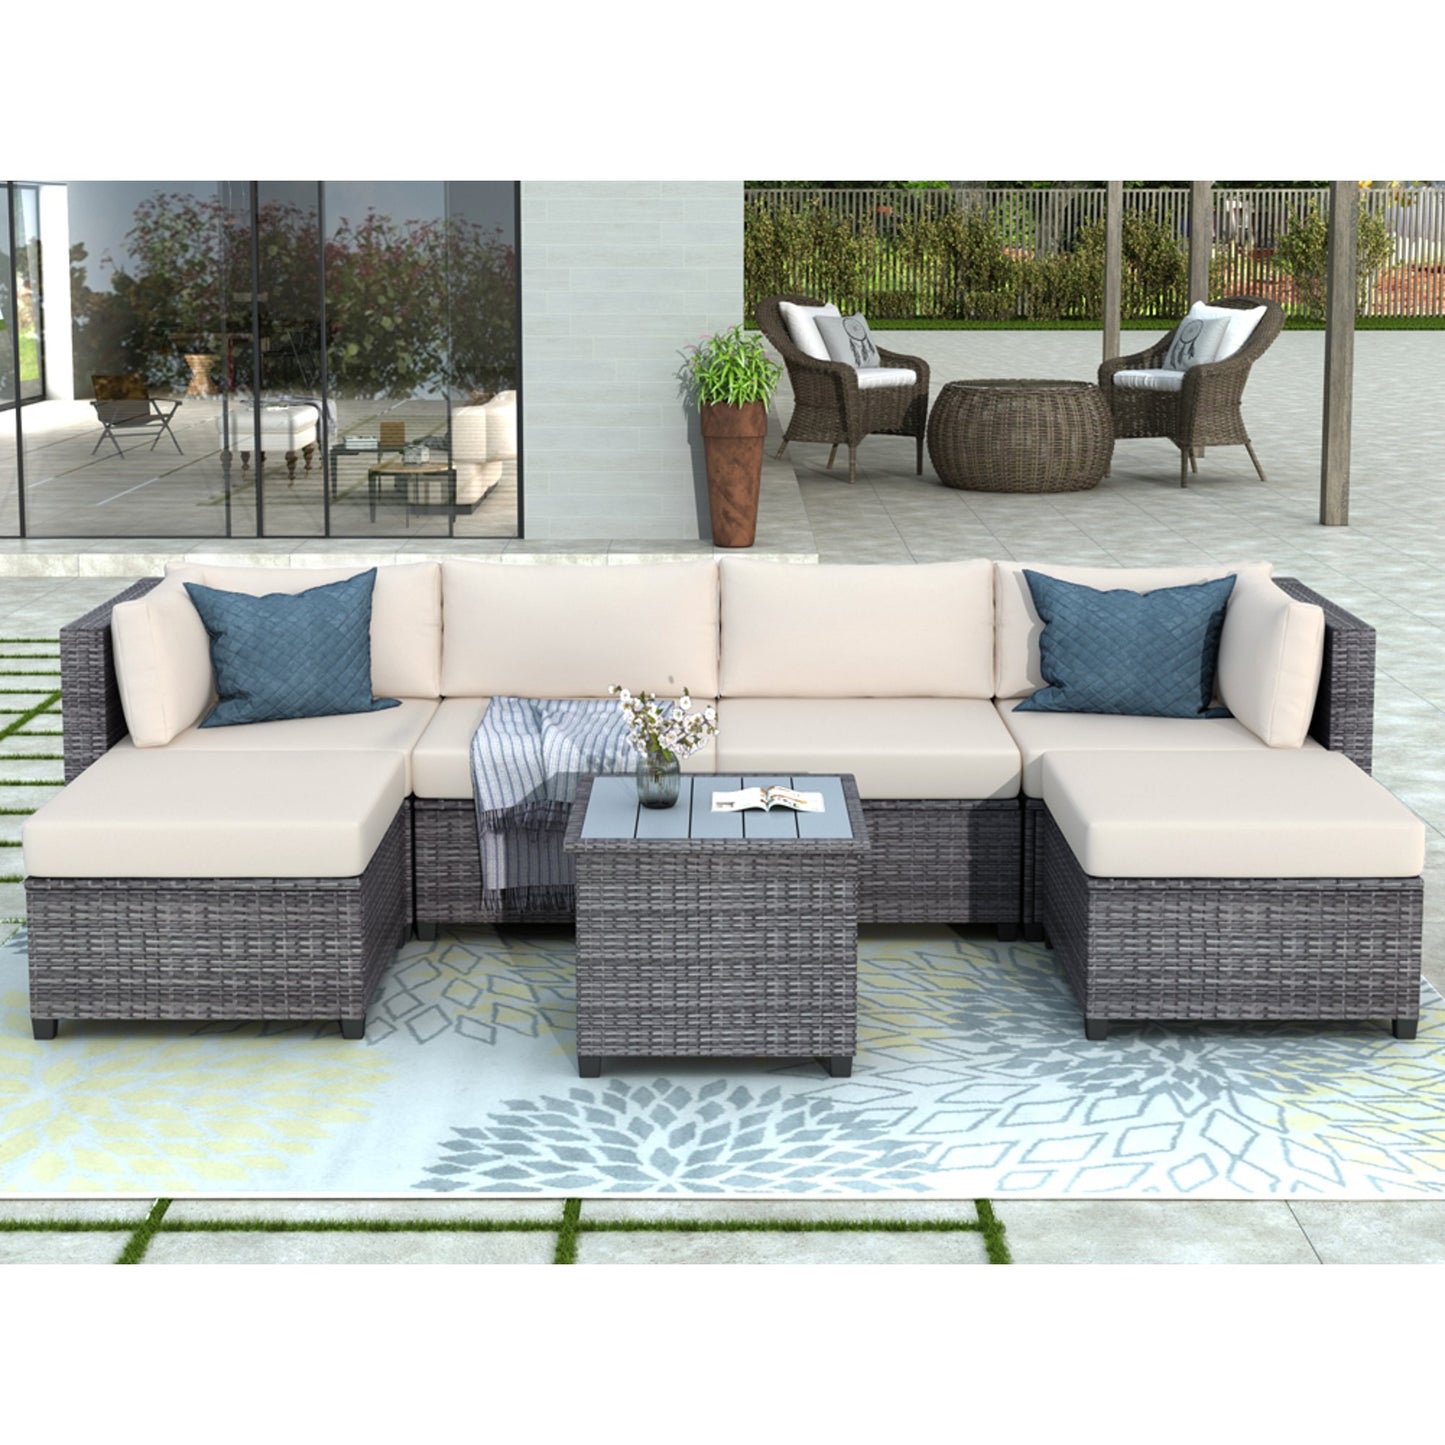 Patio Conversation Set, 7 Piece PE Wicker Furniture Chair Set with Table, Ottoman & Cushions, All-Weather Outdoor Cushioned Sectional Sofa Chairs, Rattan Sofa Set for Patio Deck Backyard, B724